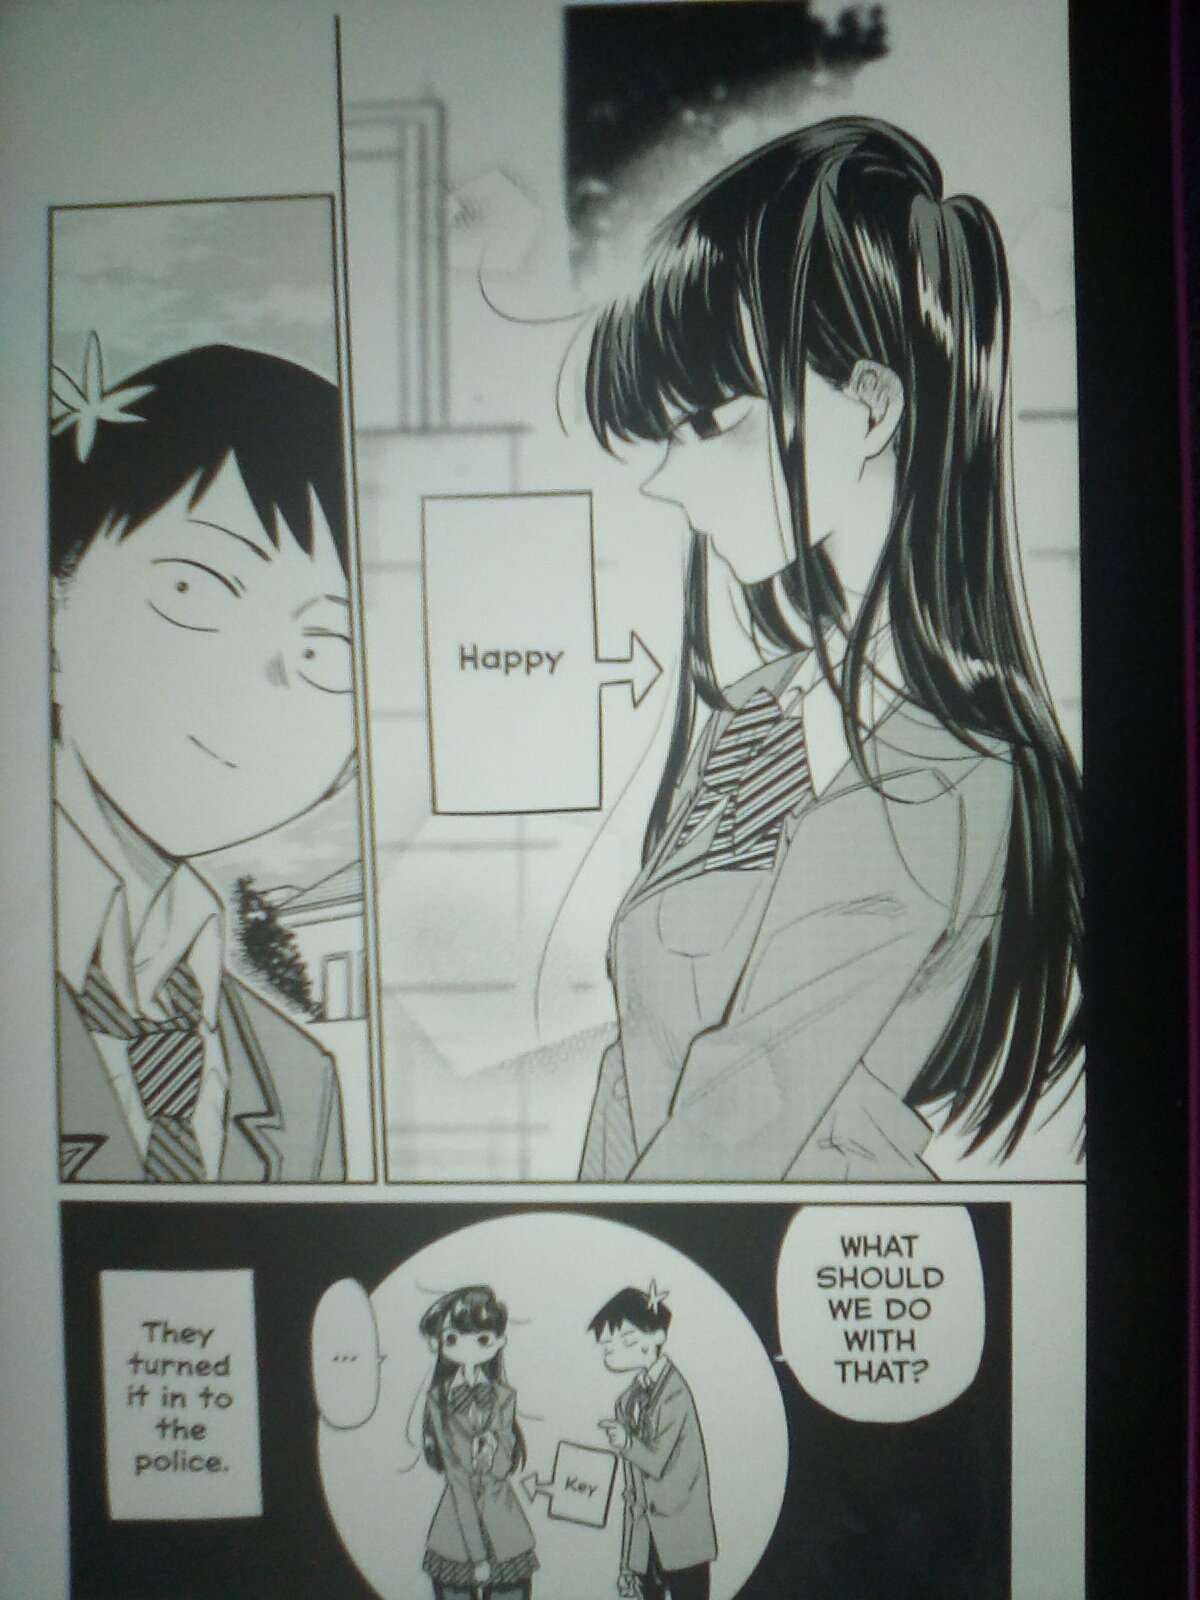 The way Komi adresses and communicates with Tadano in such a